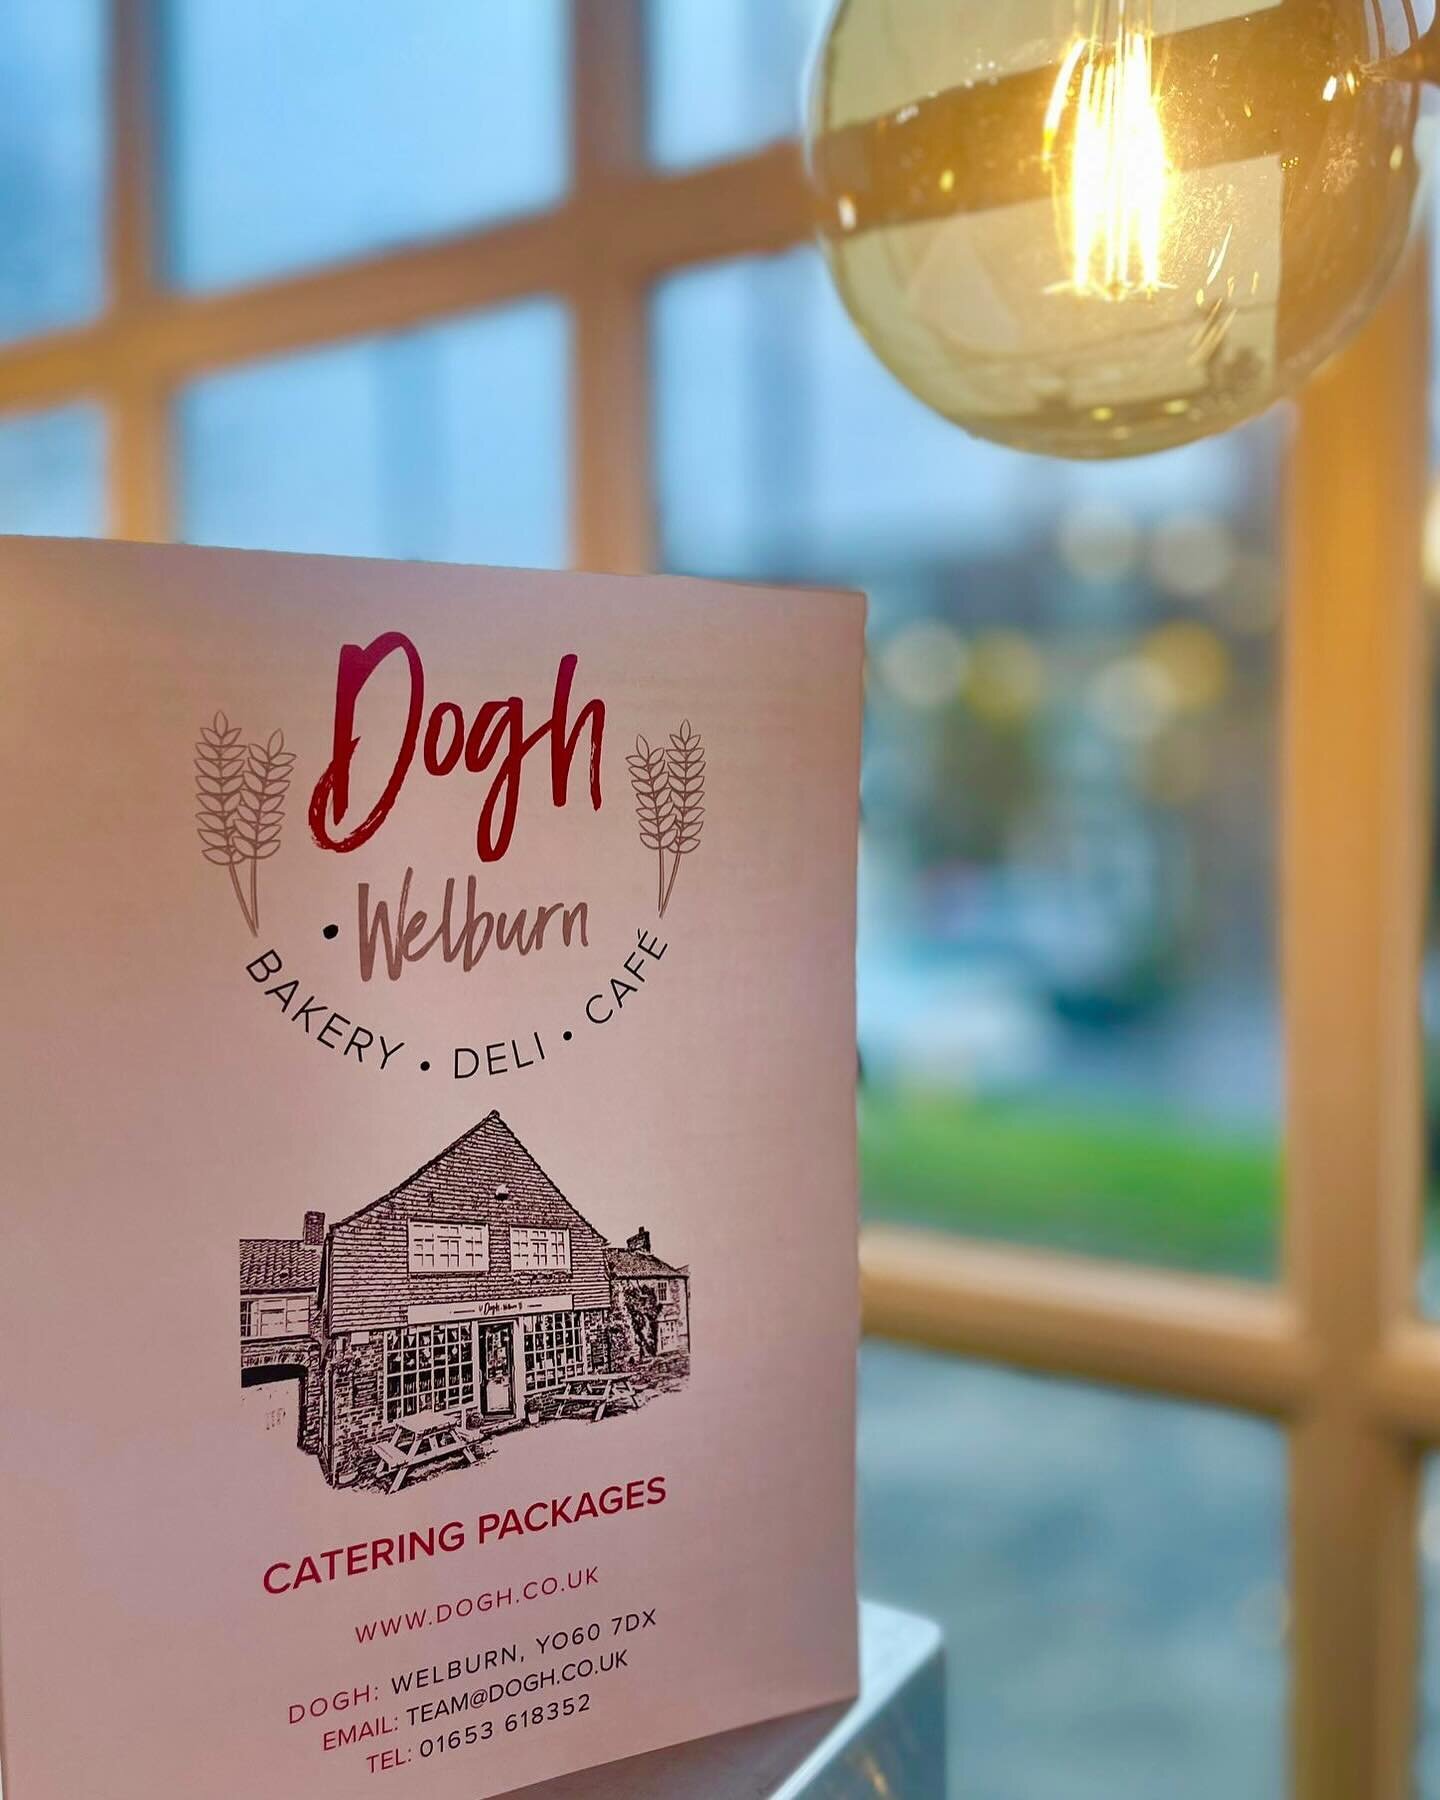 Next time you&rsquo;re in don&rsquo;t forget to pick up one of our brand new catering brochures! With options to suit every occasion and budget, our catering packages can be completely bespoke and tailored to your needs.
Ask in the cafe today!